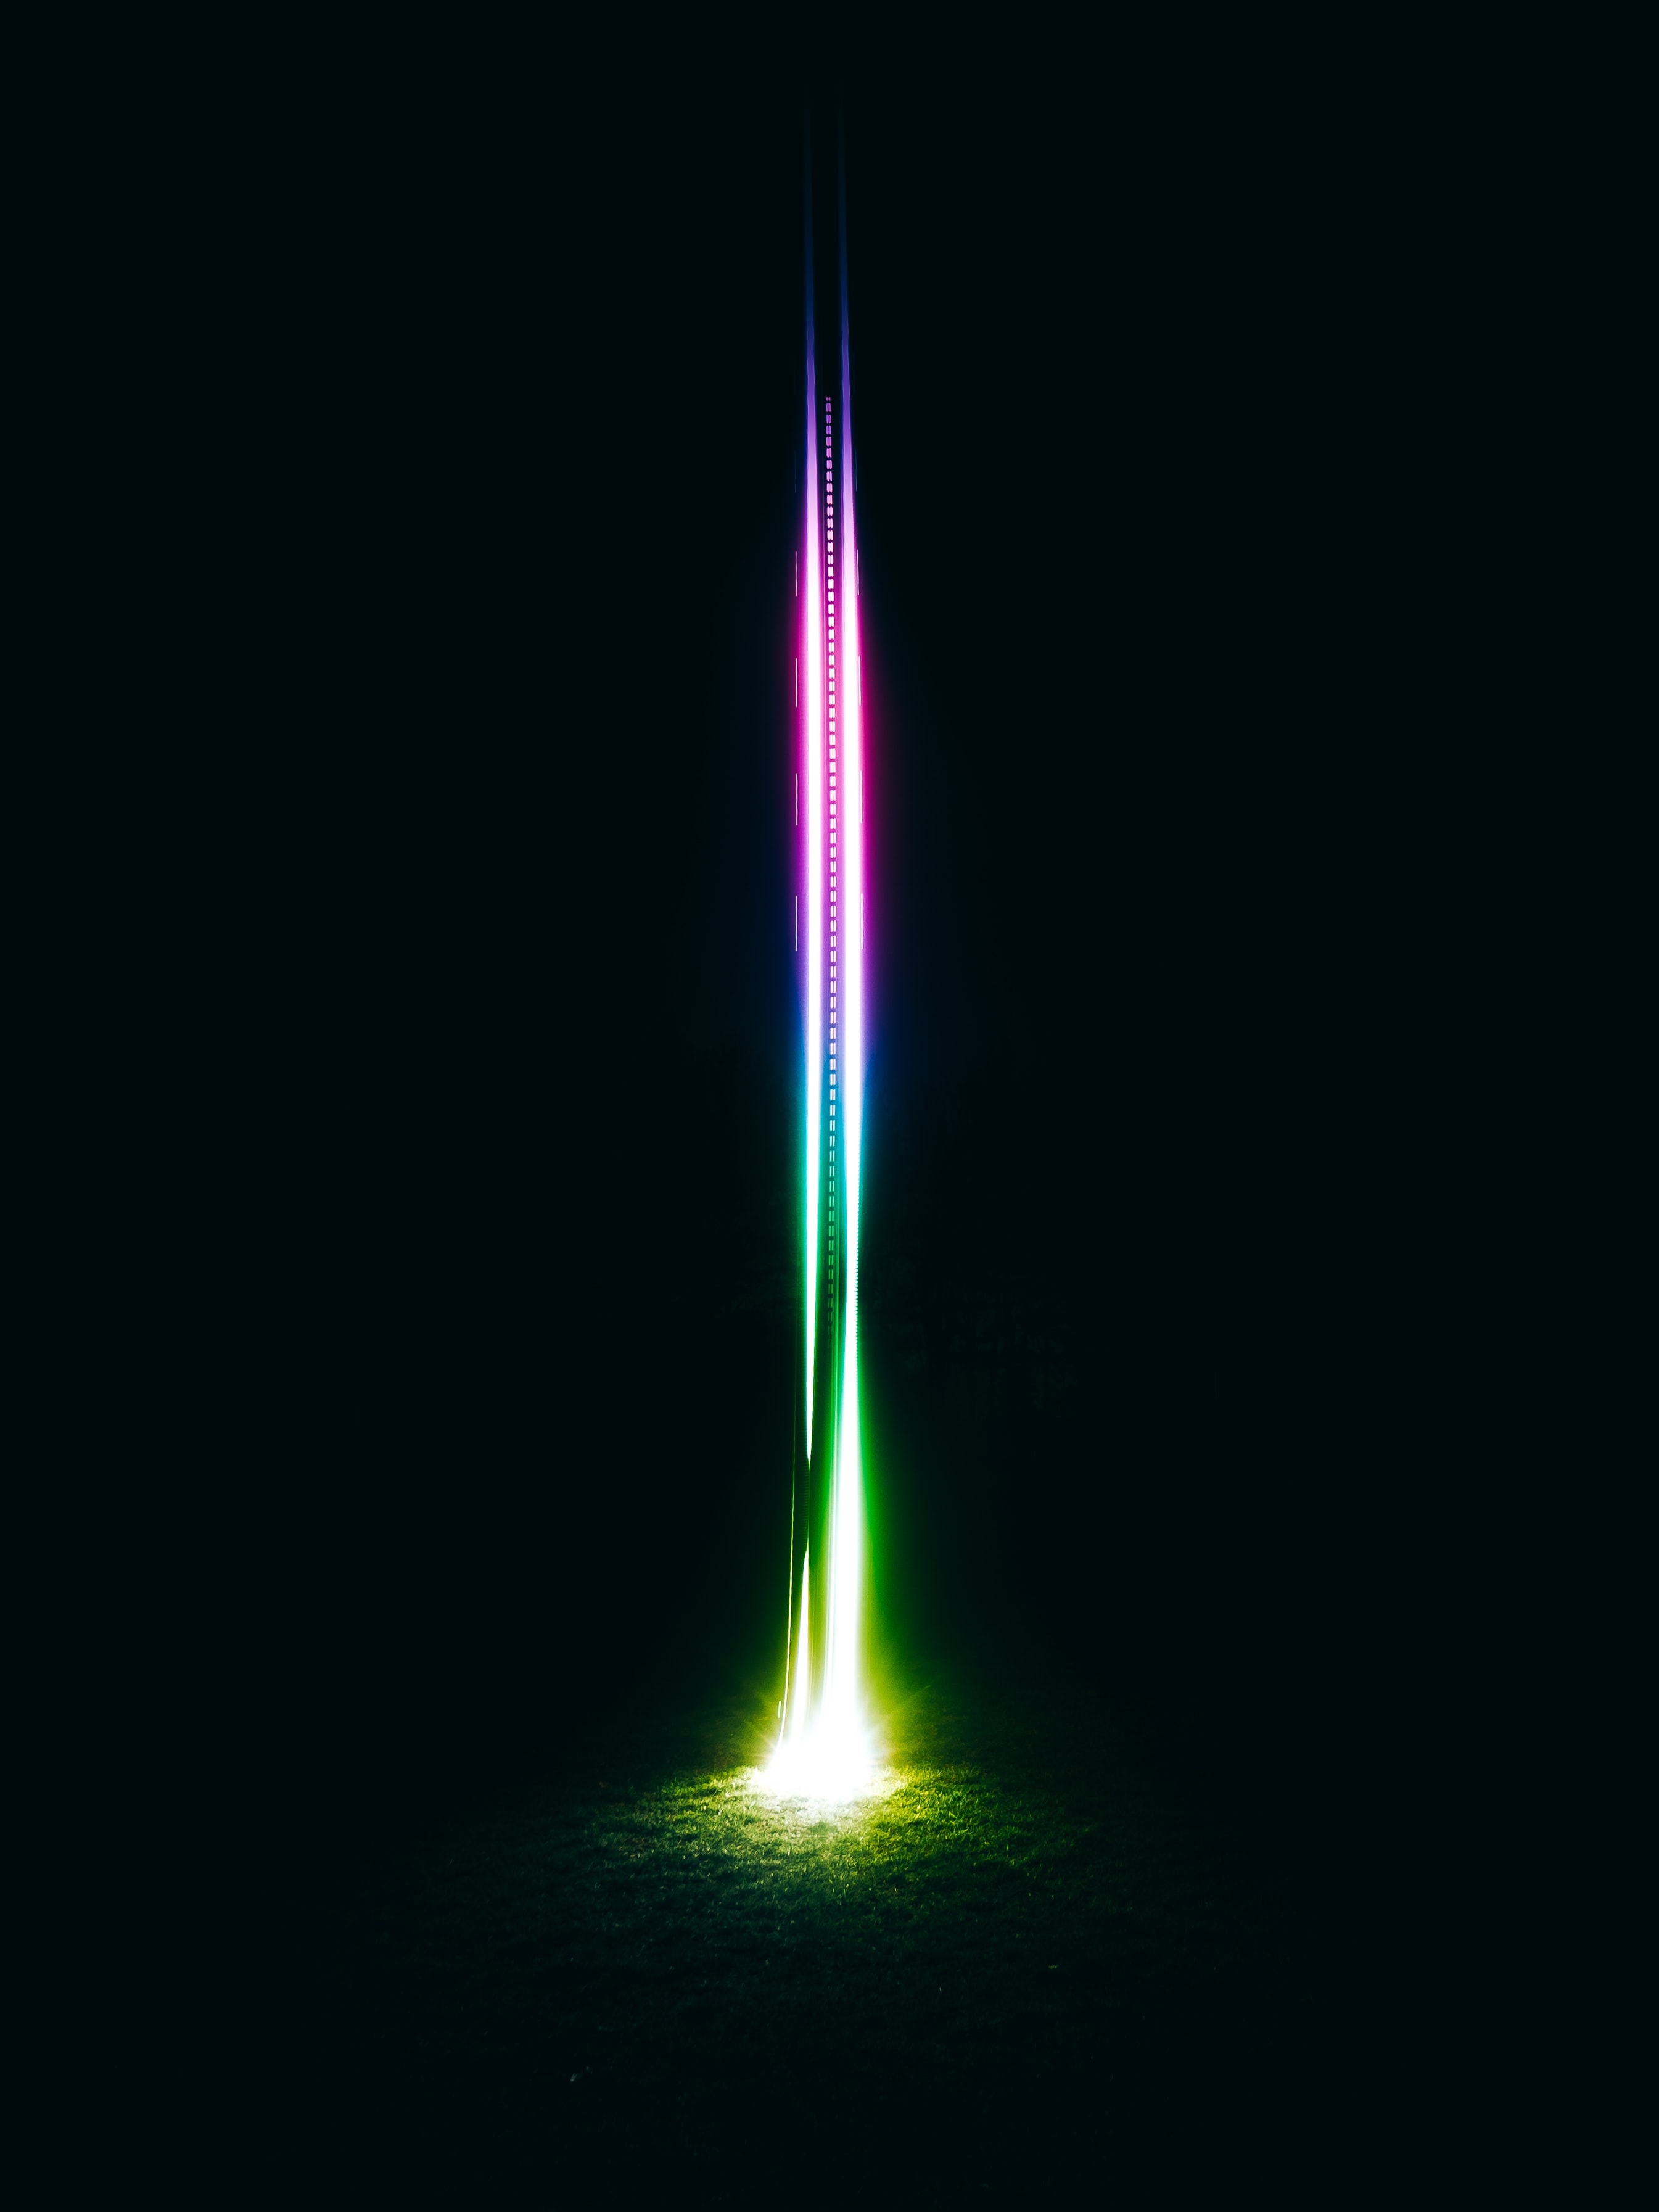 neon, glow, multicolored, motley, dark cell phone wallpapers